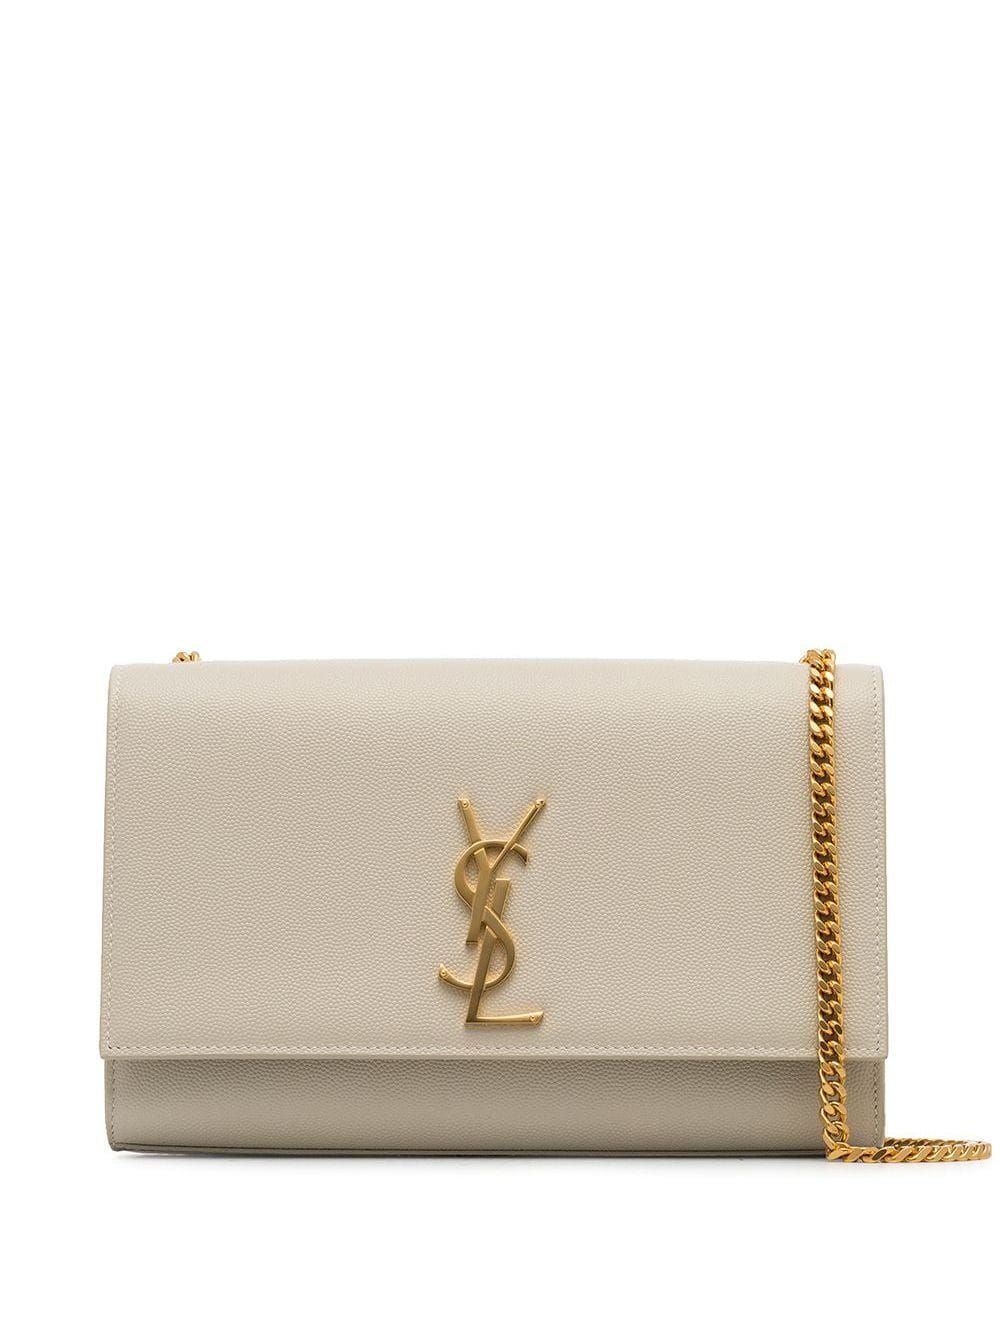 SAINT LAURENT Cream Medium Kate Embossed Leather Cross-Body Bag with Gold-Tone Chain and YSL Clasp